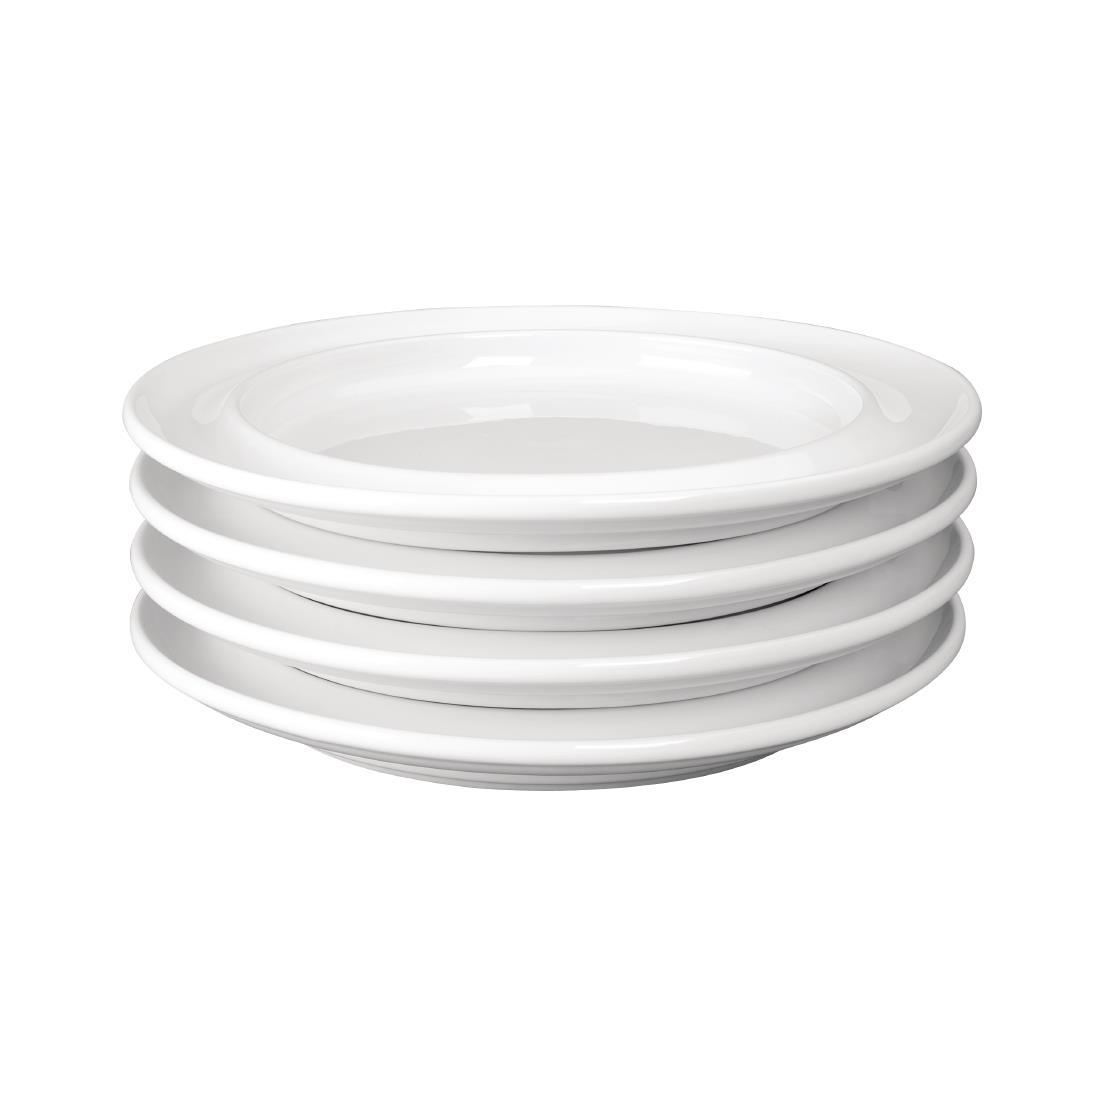 Olympia Heritage Raised Rim Plates White 253mm (Pack of 4) - DW153  - 4